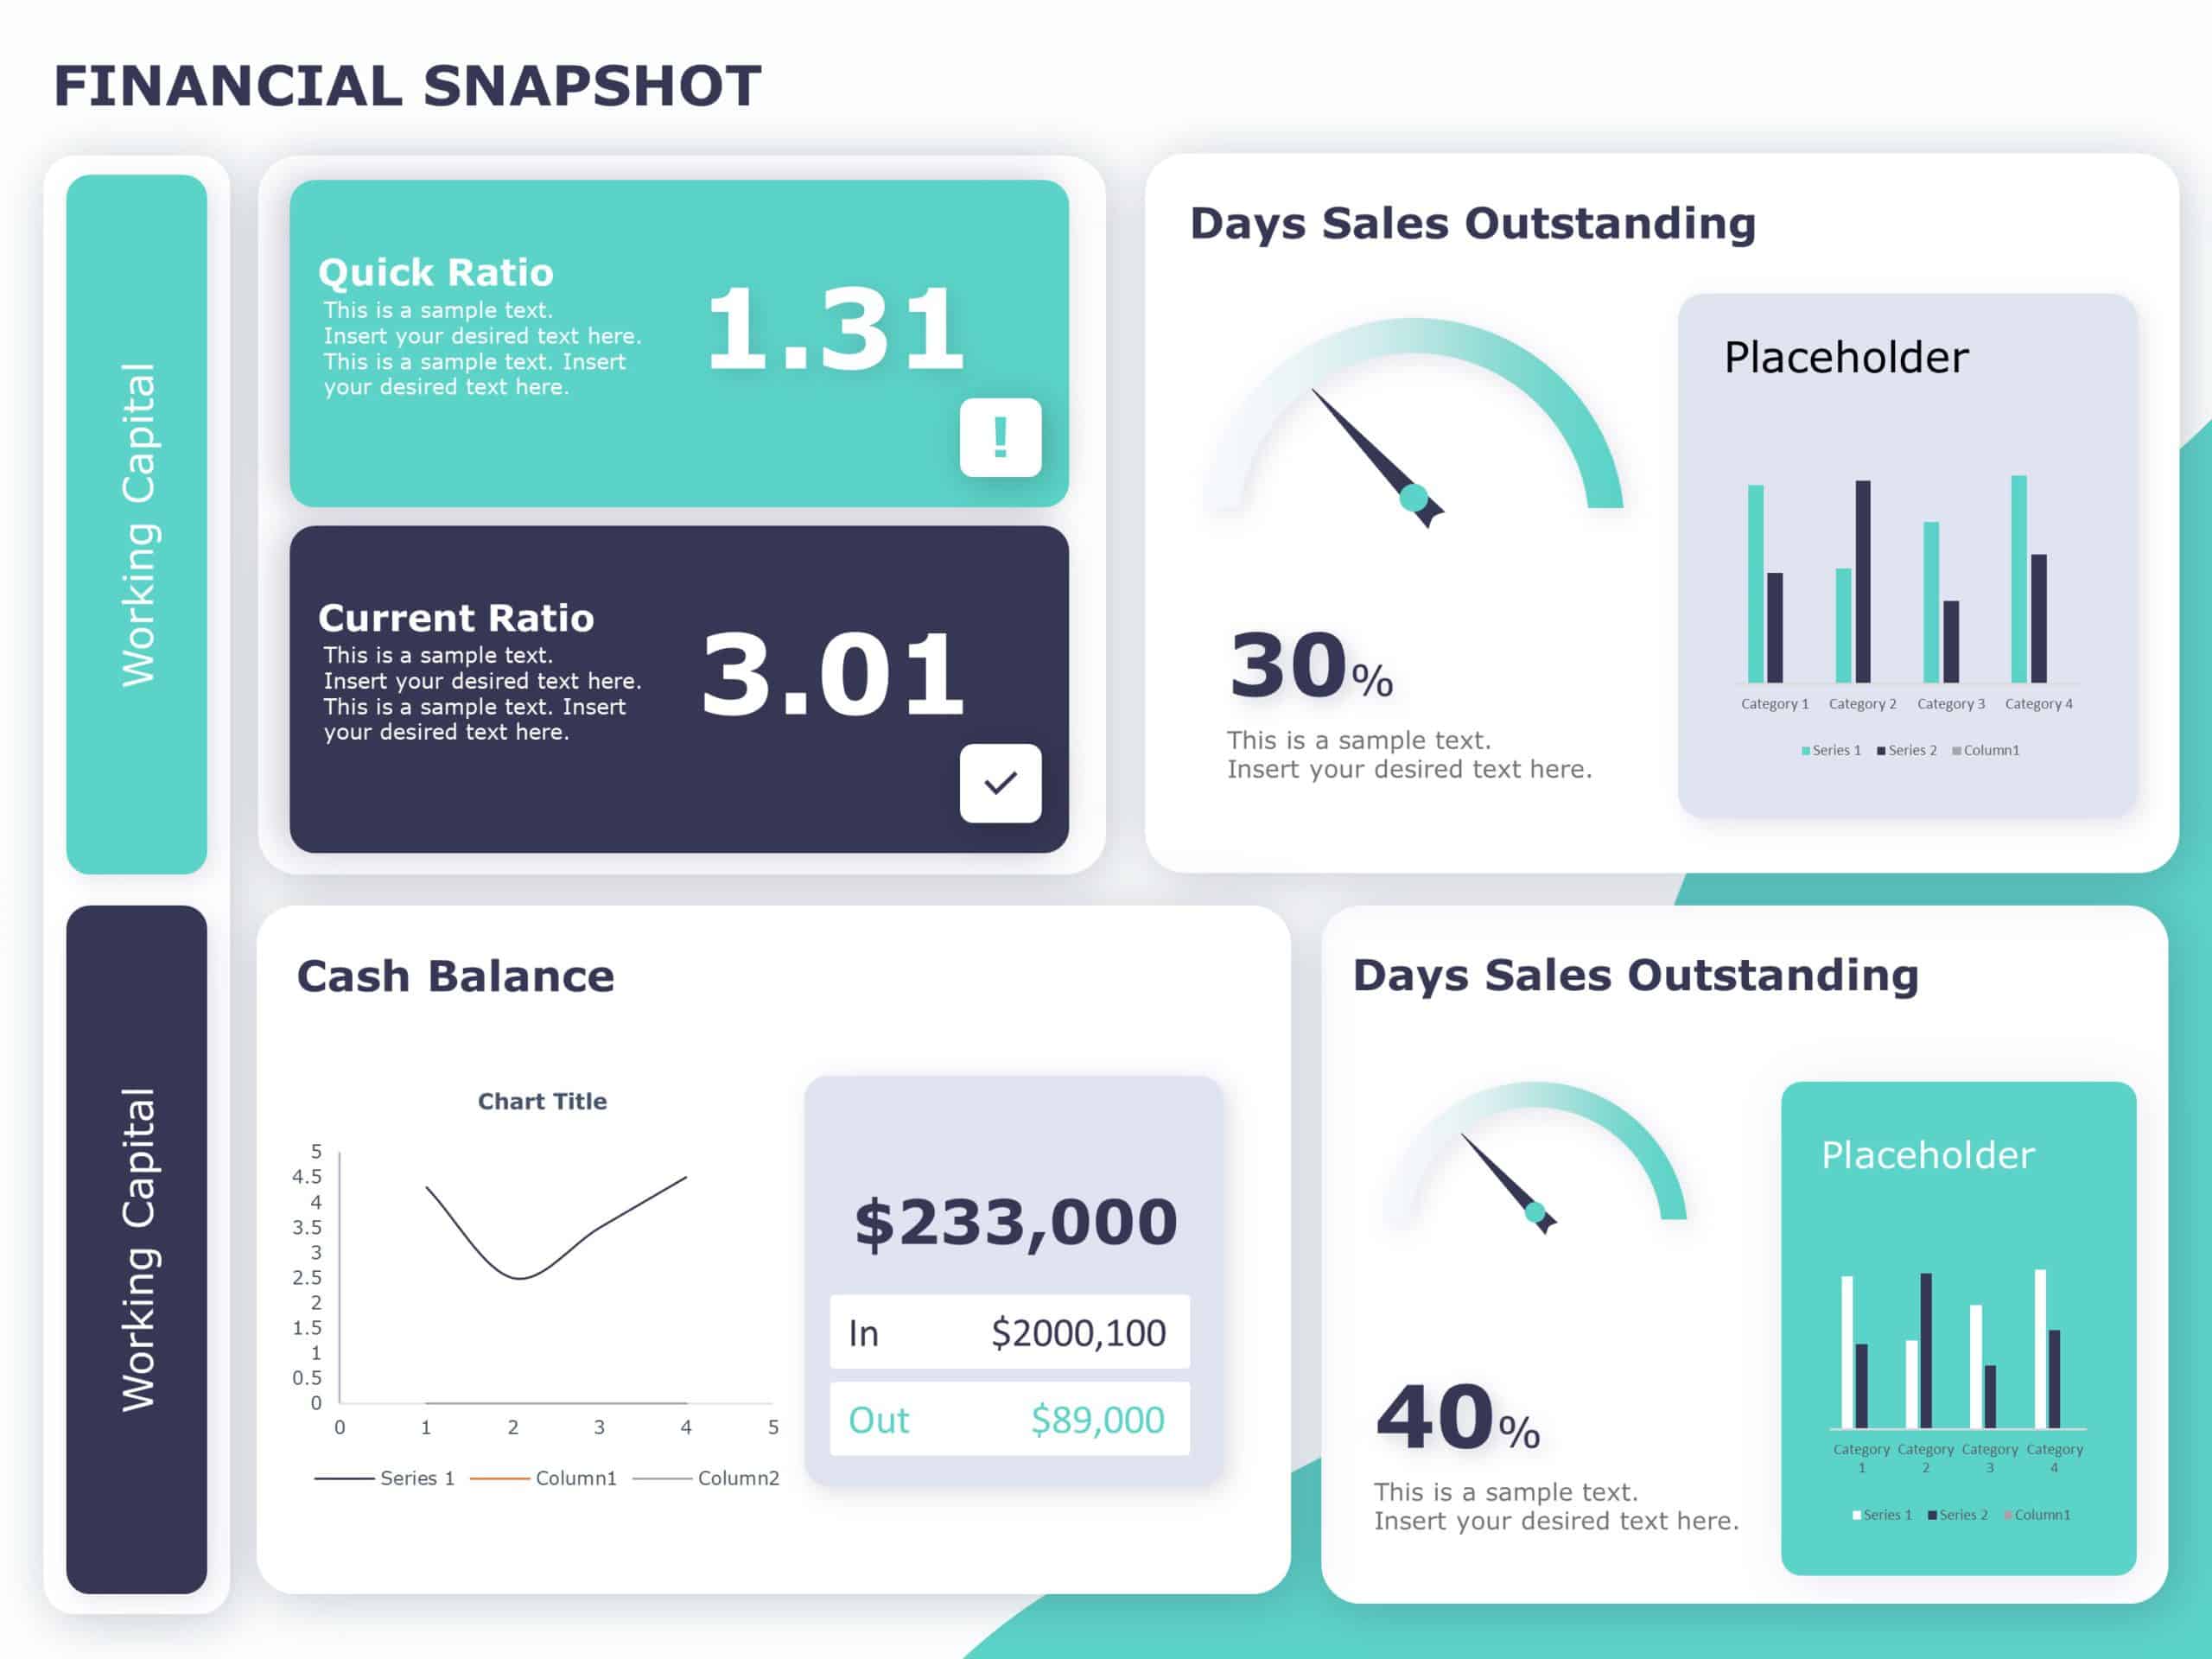 Financial Summary PowerPoint Template